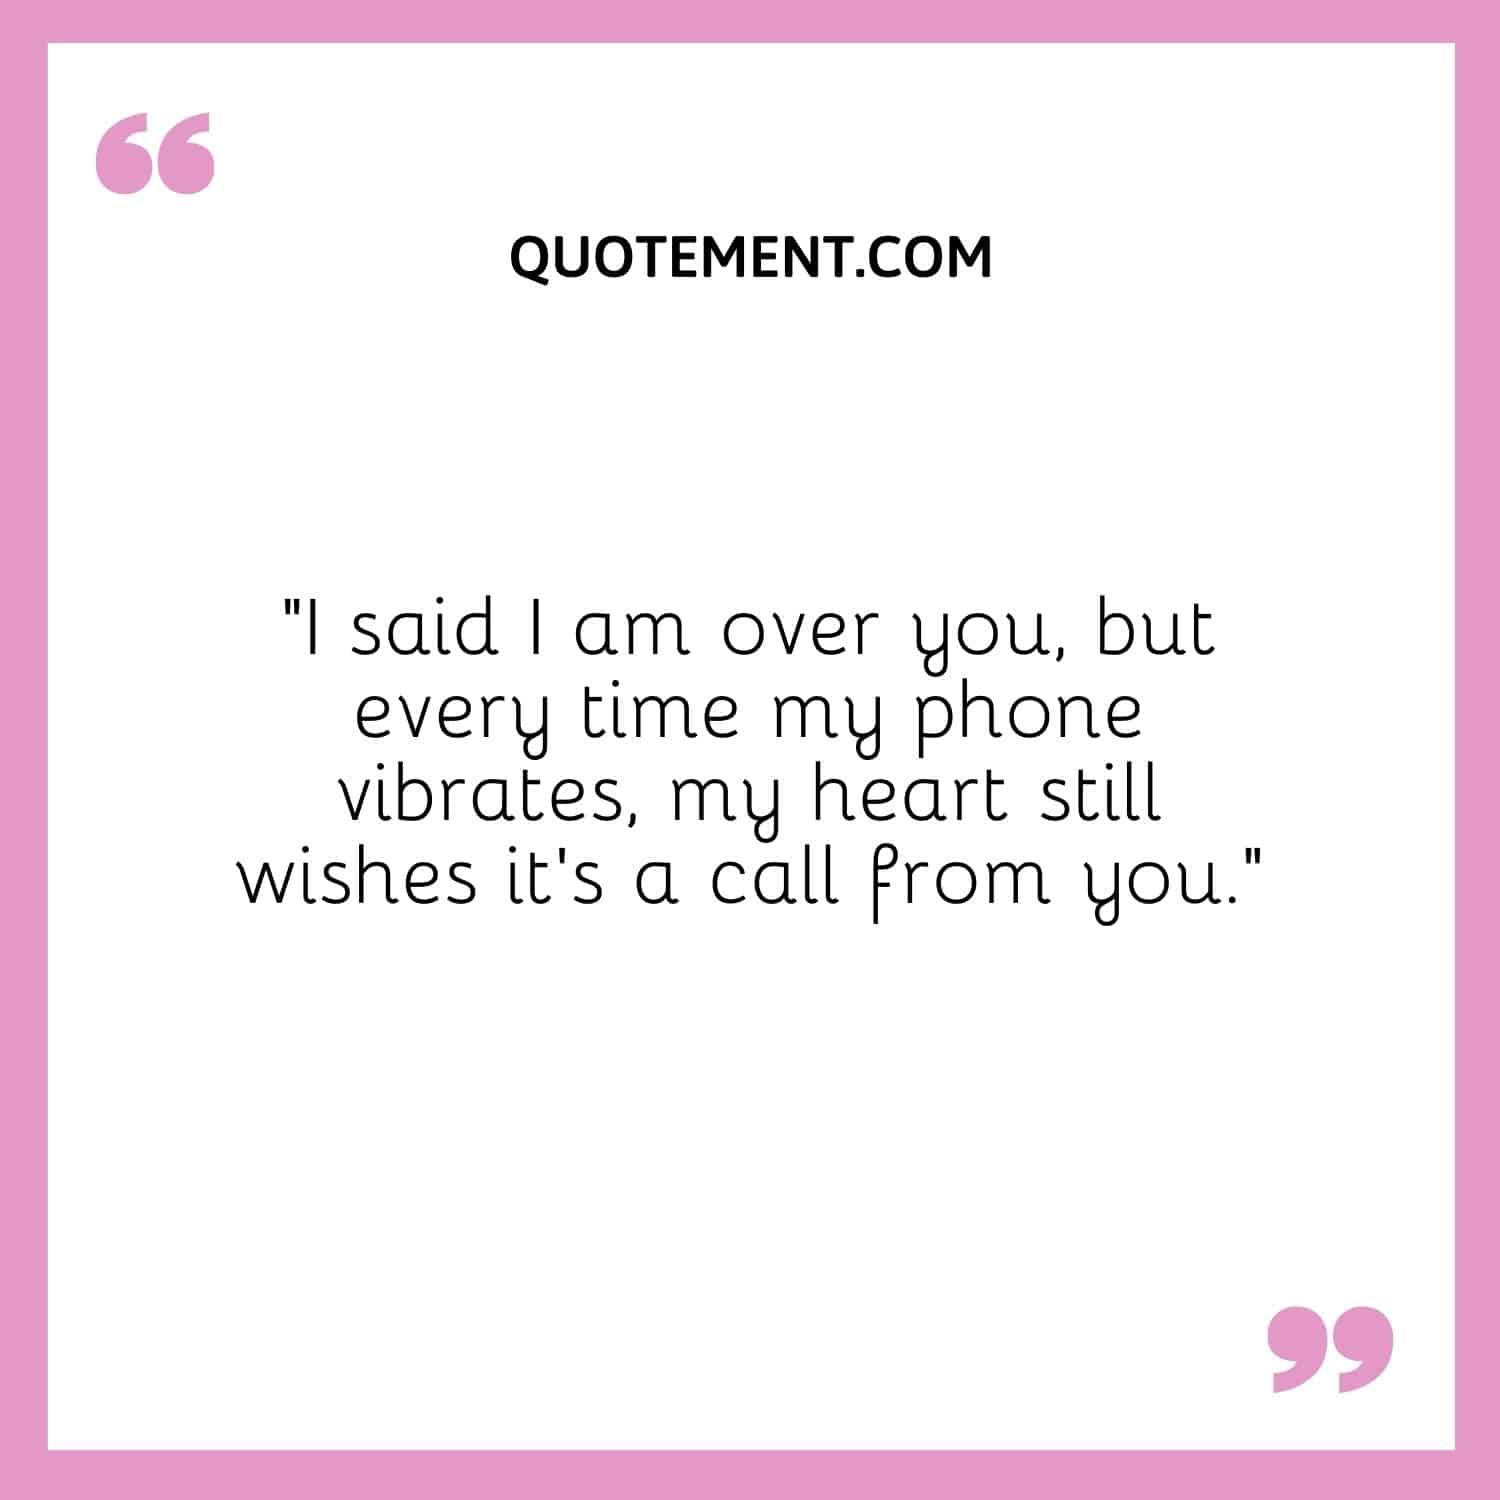 I said I am over you, but every time my phone vibrates, my heart still wishes it’s a call from you